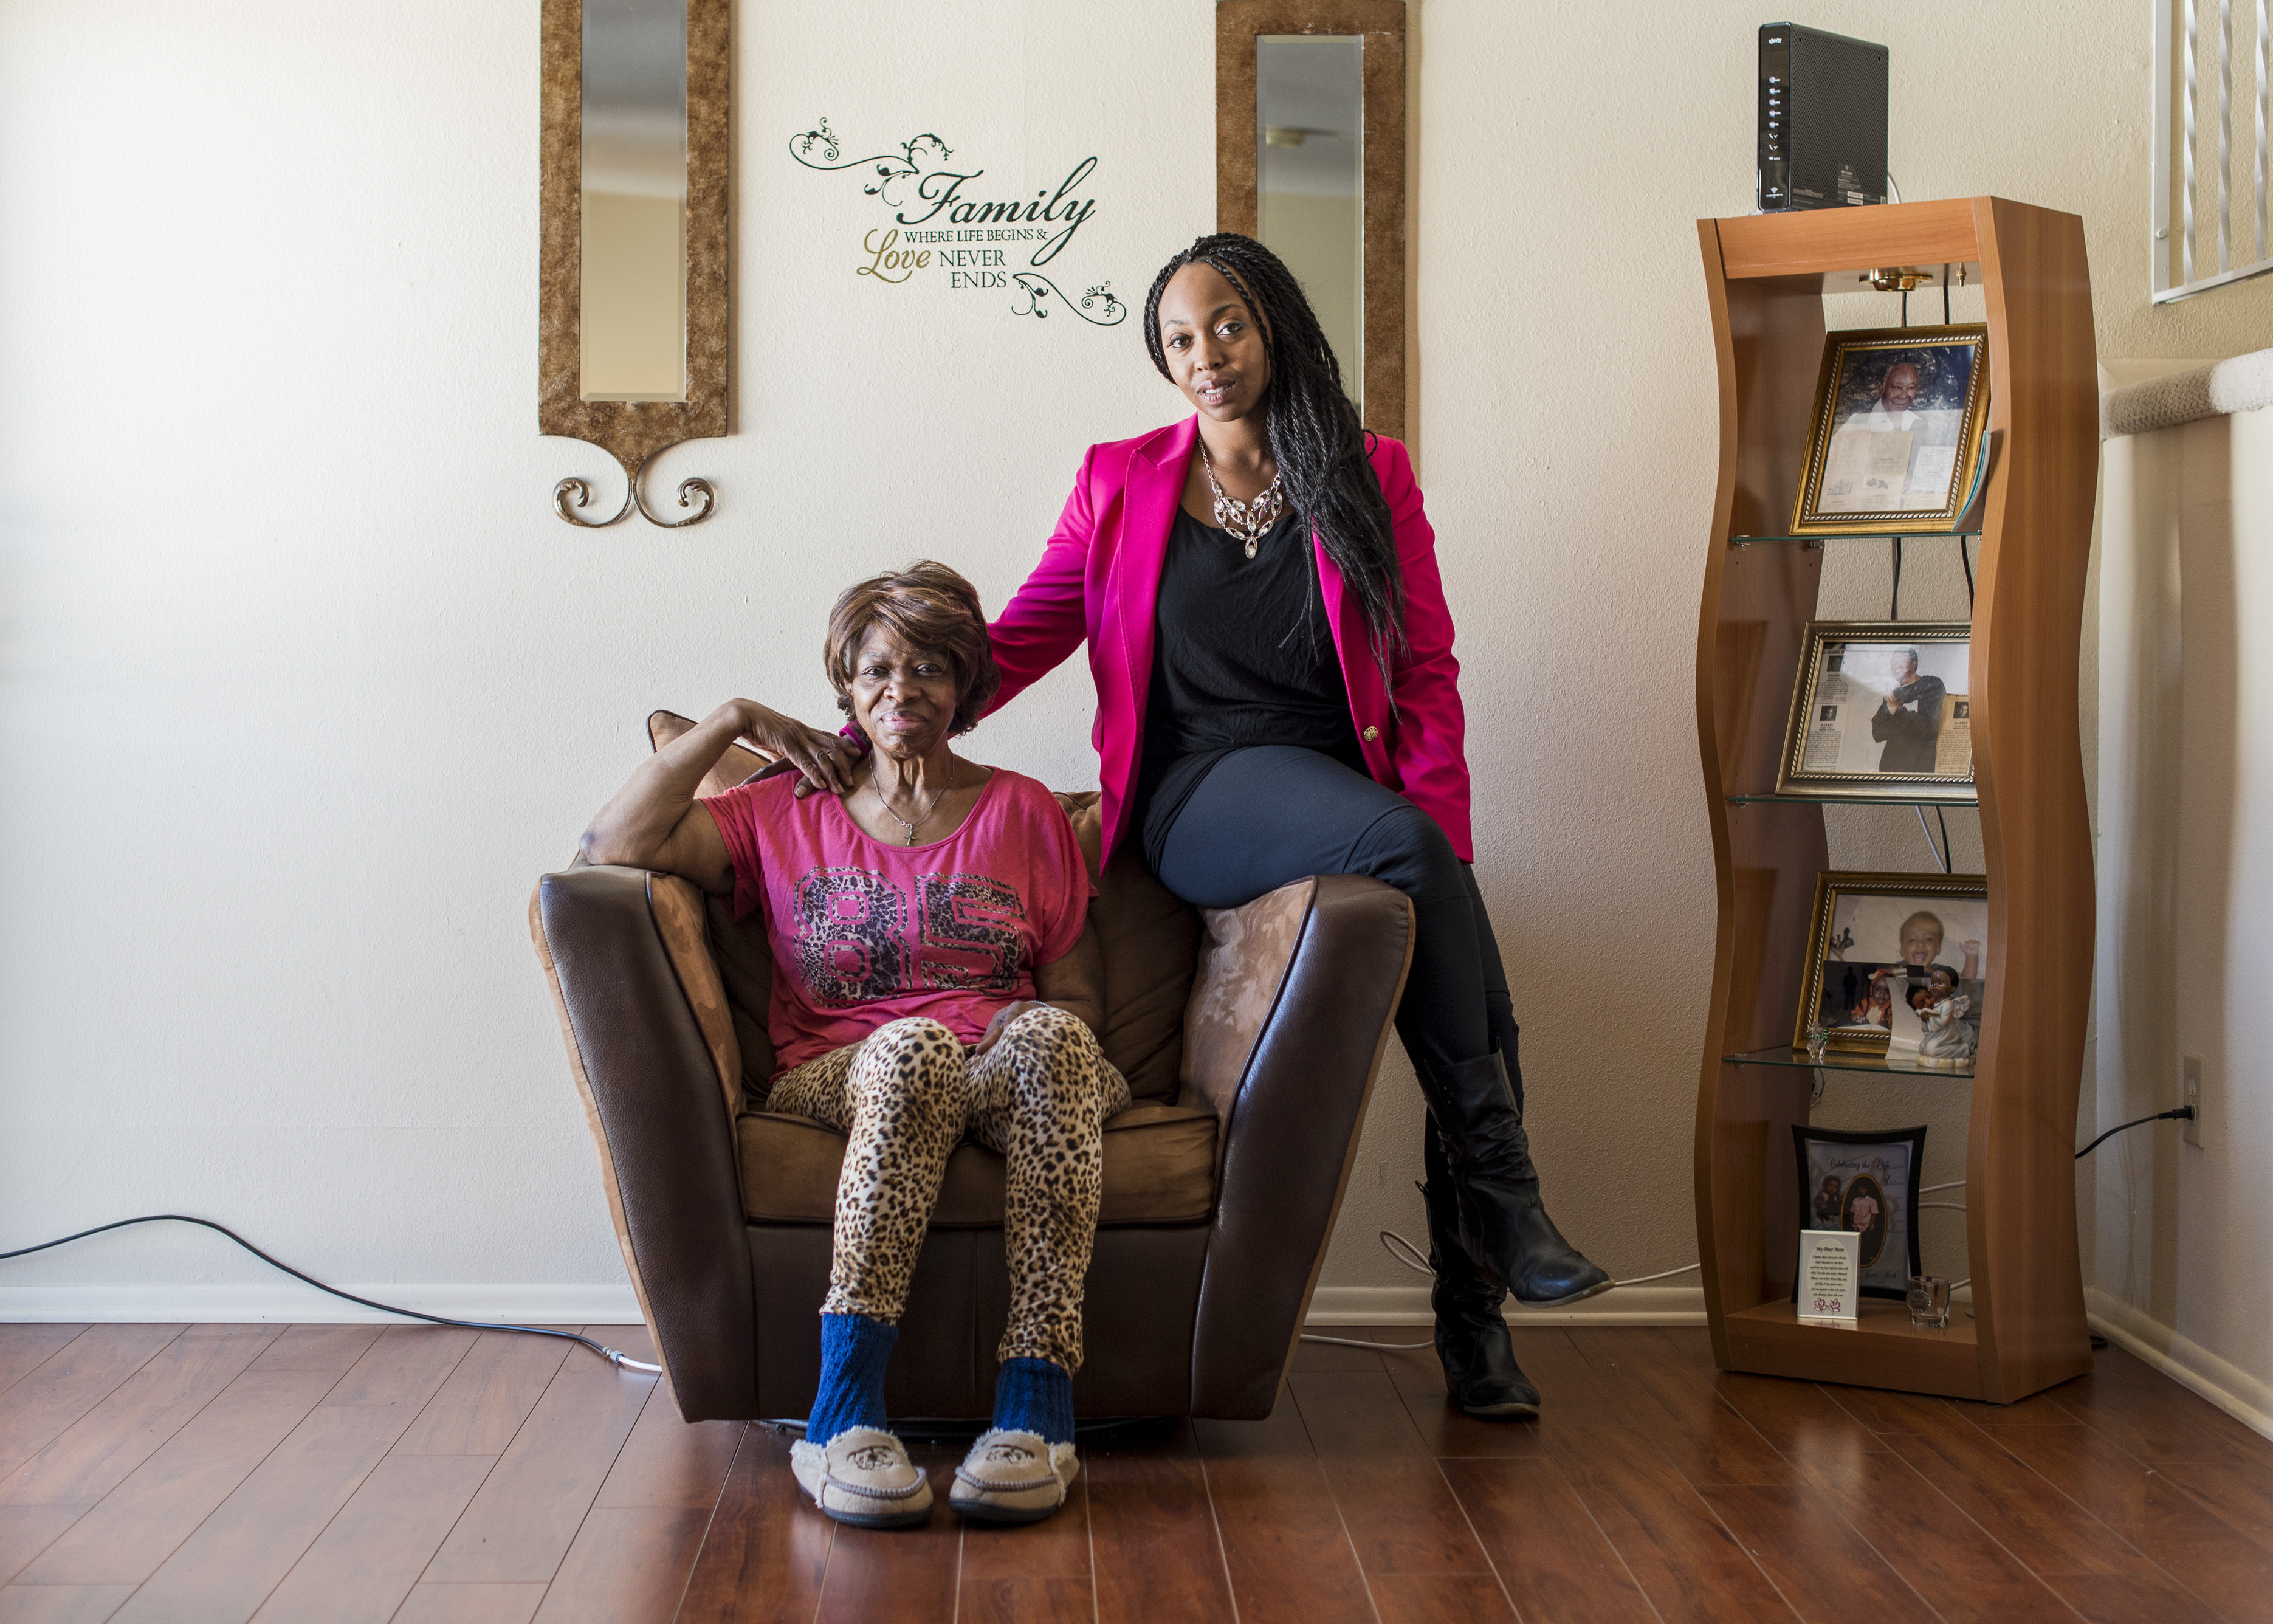 Phyllis McDowell and her daughter Krystin Stevenson, a single mother who gave up her $40,000-a-year job when her mother suffered a stroke and needed her help, in Denver.